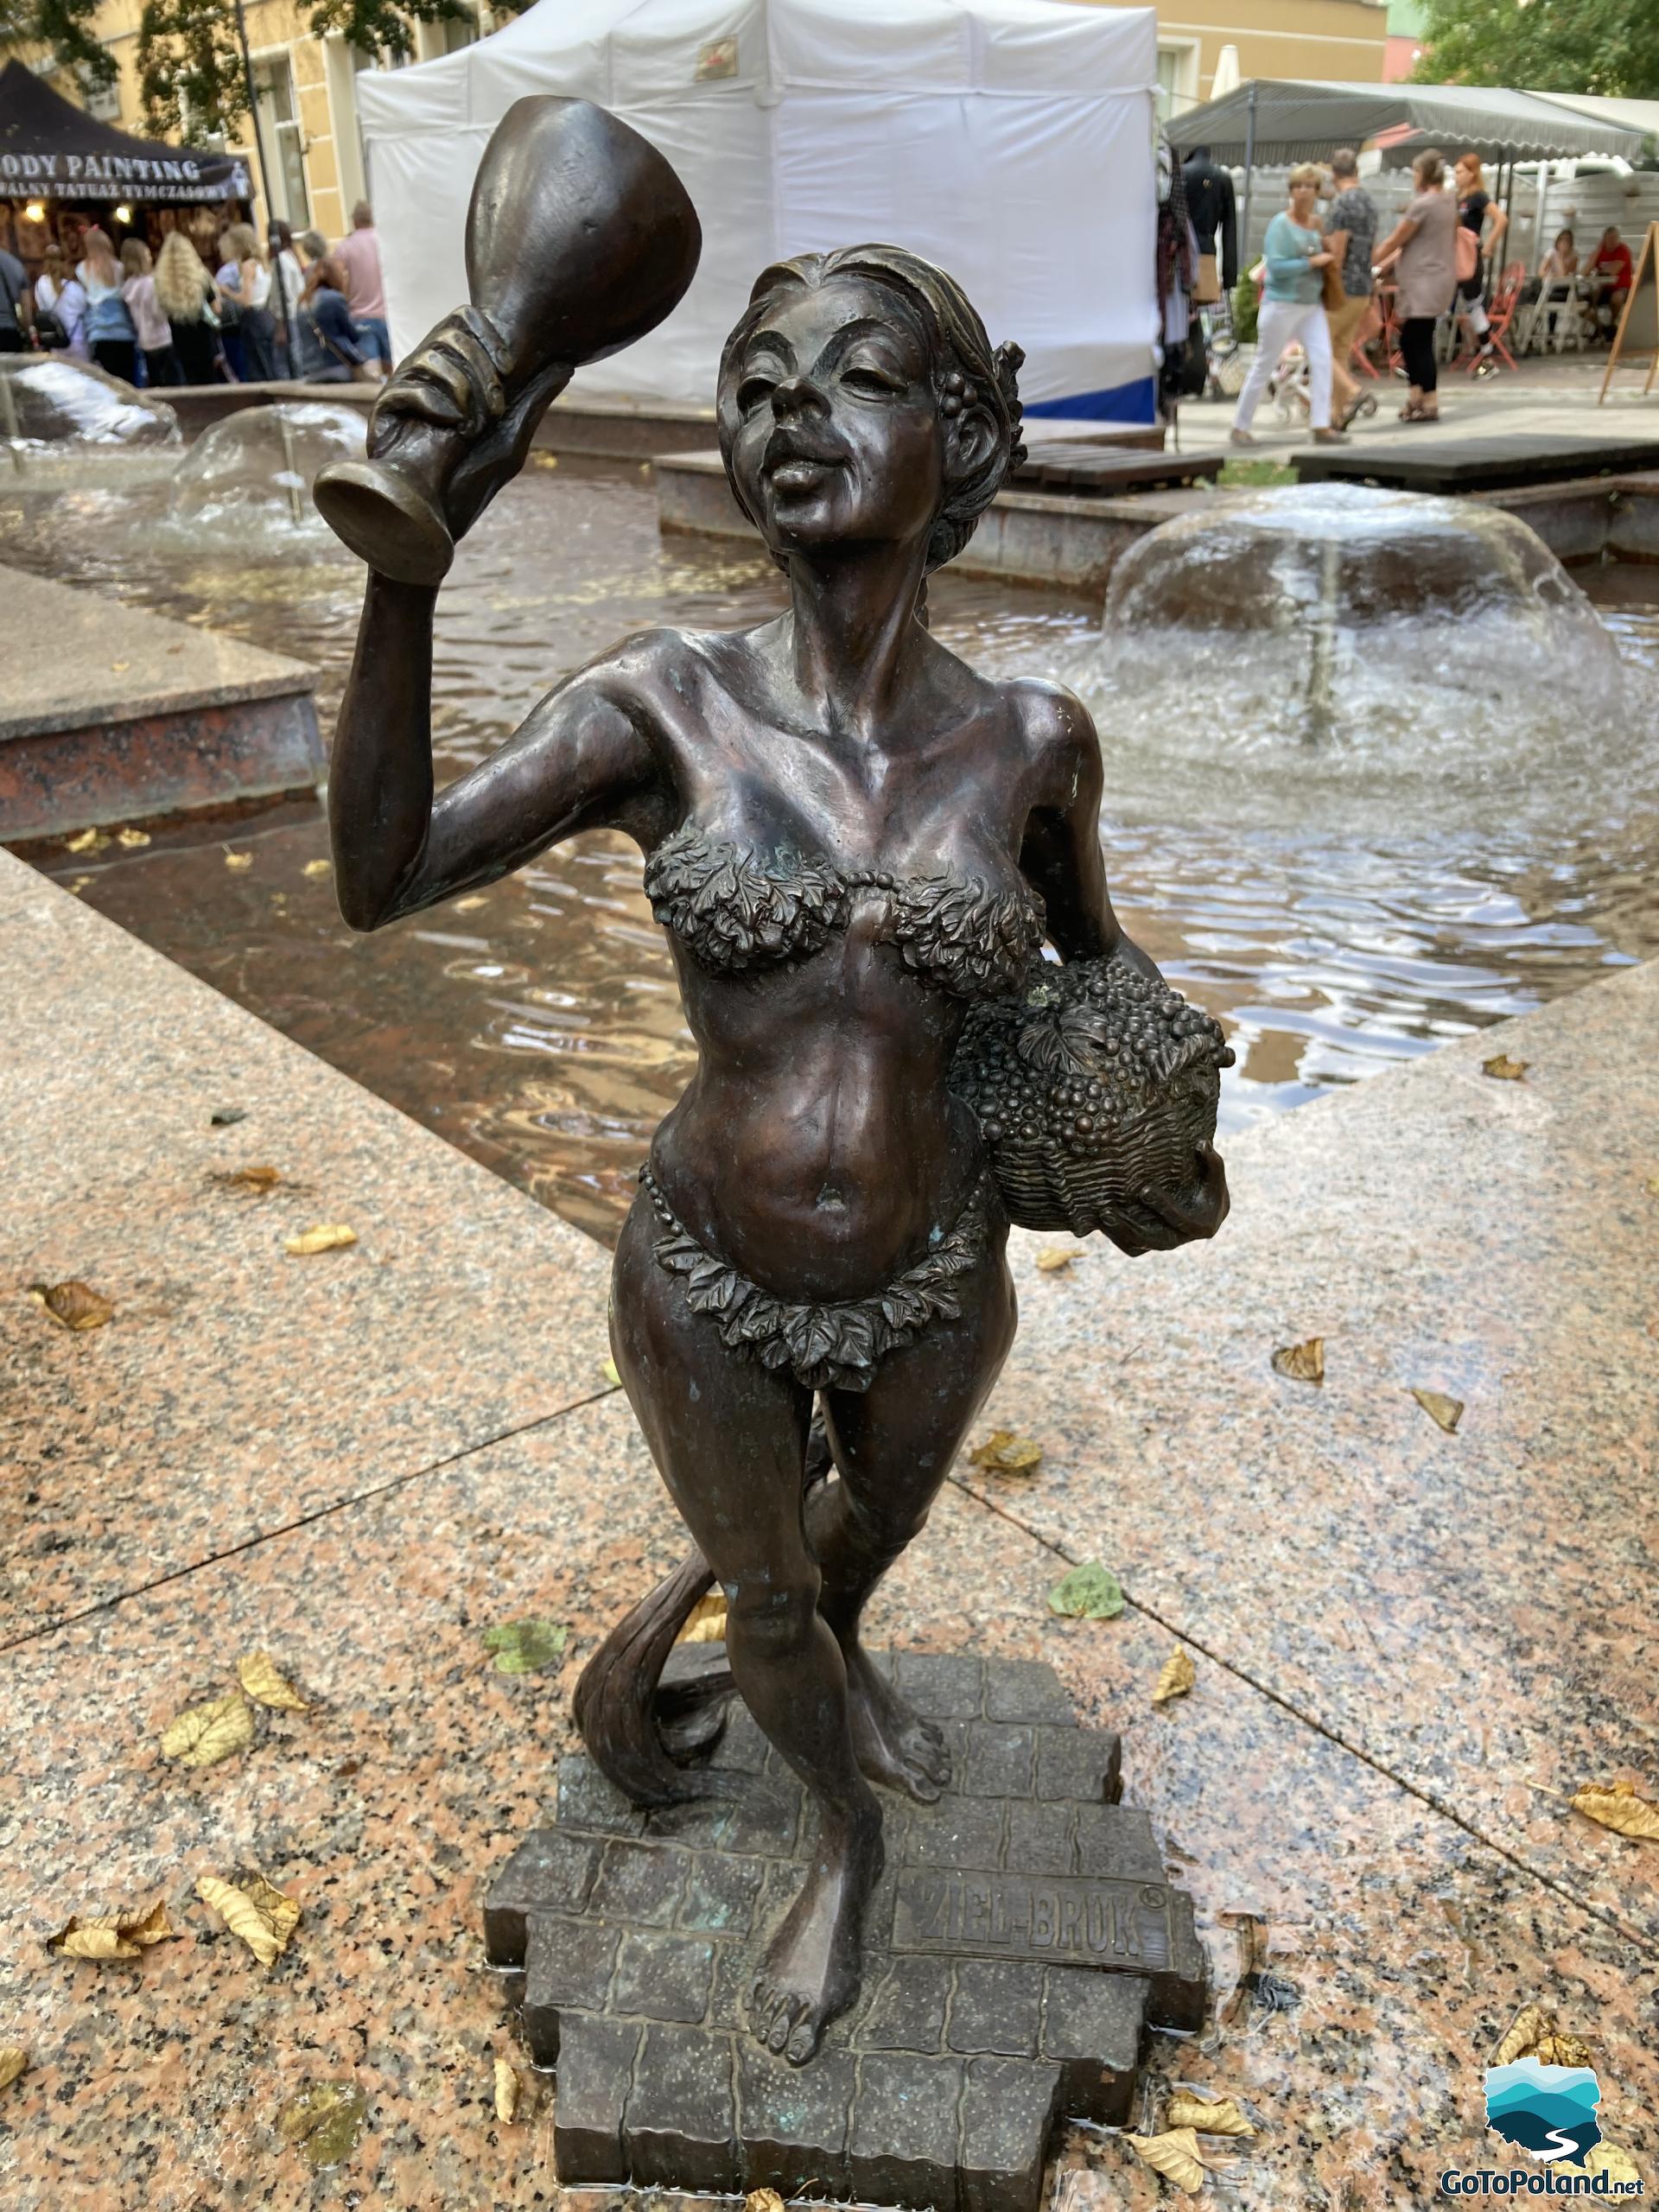 A small sculpture of a woman drinking wine